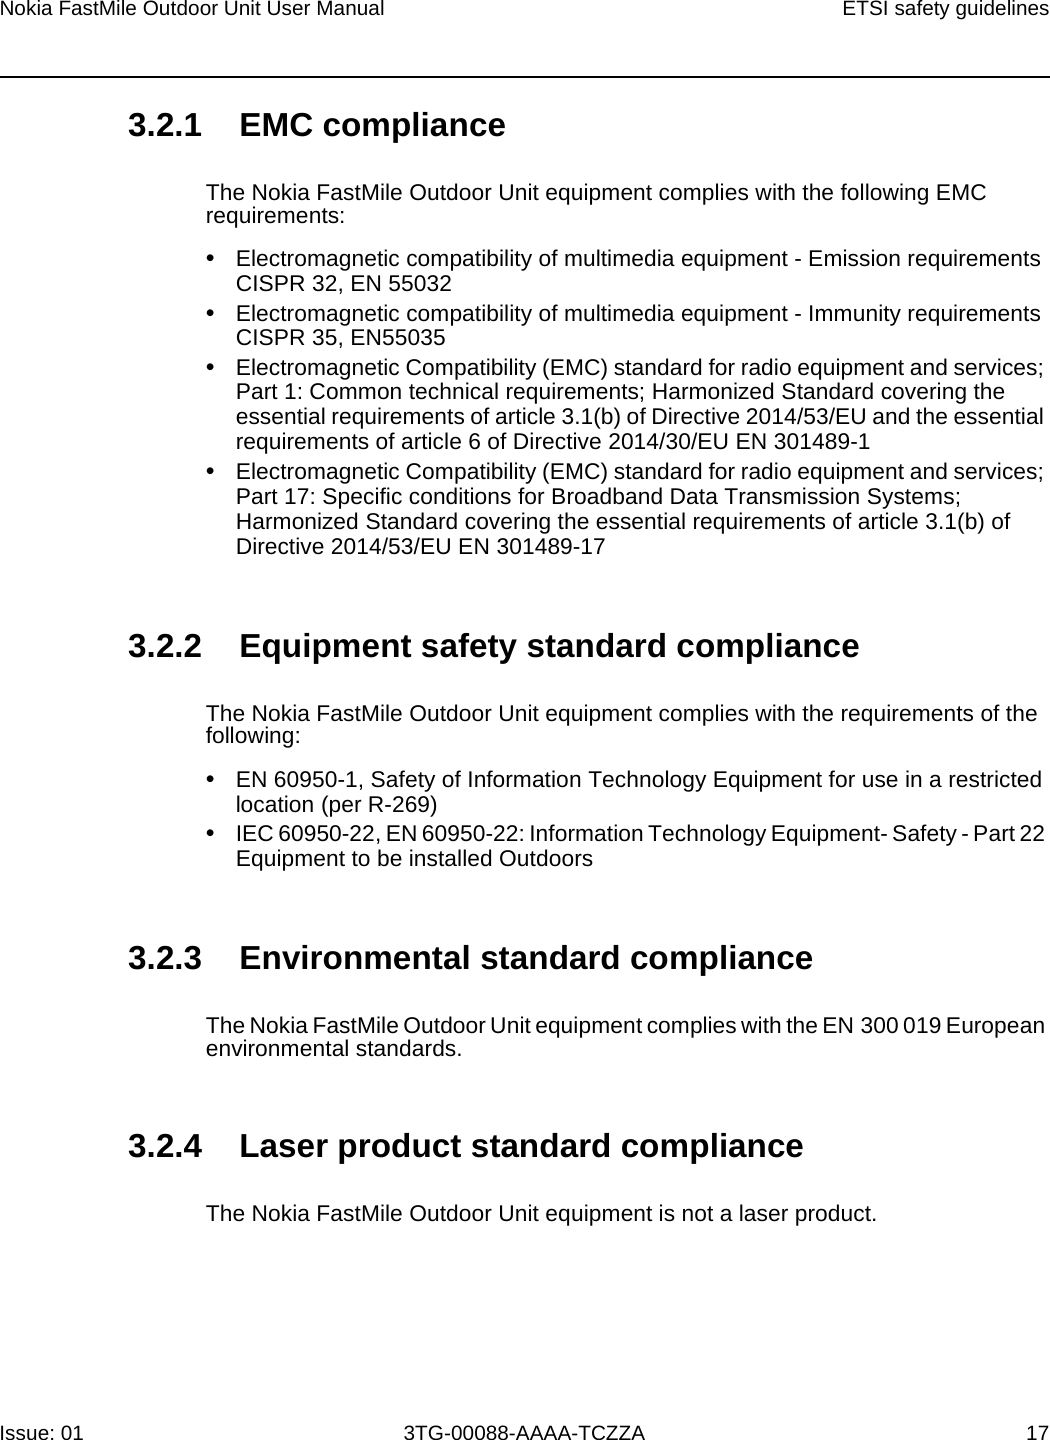 Nokia FastMile Outdoor Unit User Manual ETSI safety guidelinesIssue: 01 3TG-00088-AAAA-TCZZA 17 3.2.1 EMC complianceThe Nokia FastMile Outdoor Unit equipment complies with the following EMC requirements:•Electromagnetic compatibility of multimedia equipment - Emission requirements CISPR 32, EN 55032•Electromagnetic compatibility of multimedia equipment - Immunity requirements CISPR 35, EN55035•Electromagnetic Compatibility (EMC) standard for radio equipment and services; Part 1: Common technical requirements; Harmonized Standard covering the essential requirements of article 3.1(b) of Directive 2014/53/EU and the essential requirements of article 6 of Directive 2014/30/EU EN 301489-1•Electromagnetic Compatibility (EMC) standard for radio equipment and services; Part 17: Specific conditions for Broadband Data Transmission Systems; Harmonized Standard covering the essential requirements of article 3.1(b) of Directive 2014/53/EU EN 301489-173.2.2 Equipment safety standard complianceThe Nokia FastMile Outdoor Unit equipment complies with the requirements of the following: •EN 60950-1, Safety of Information Technology Equipment for use in a restricted location (per R-269)•IEC 60950-22, EN 60950-22: Information Technology Equipment- Safety - Part 22 Equipment to be installed Outdoors3.2.3 Environmental standard complianceThe Nokia FastMile Outdoor Unit equipment complies with the EN 300 019 European environmental standards.3.2.4 Laser product standard complianceThe Nokia FastMile Outdoor Unit equipment is not a laser product.